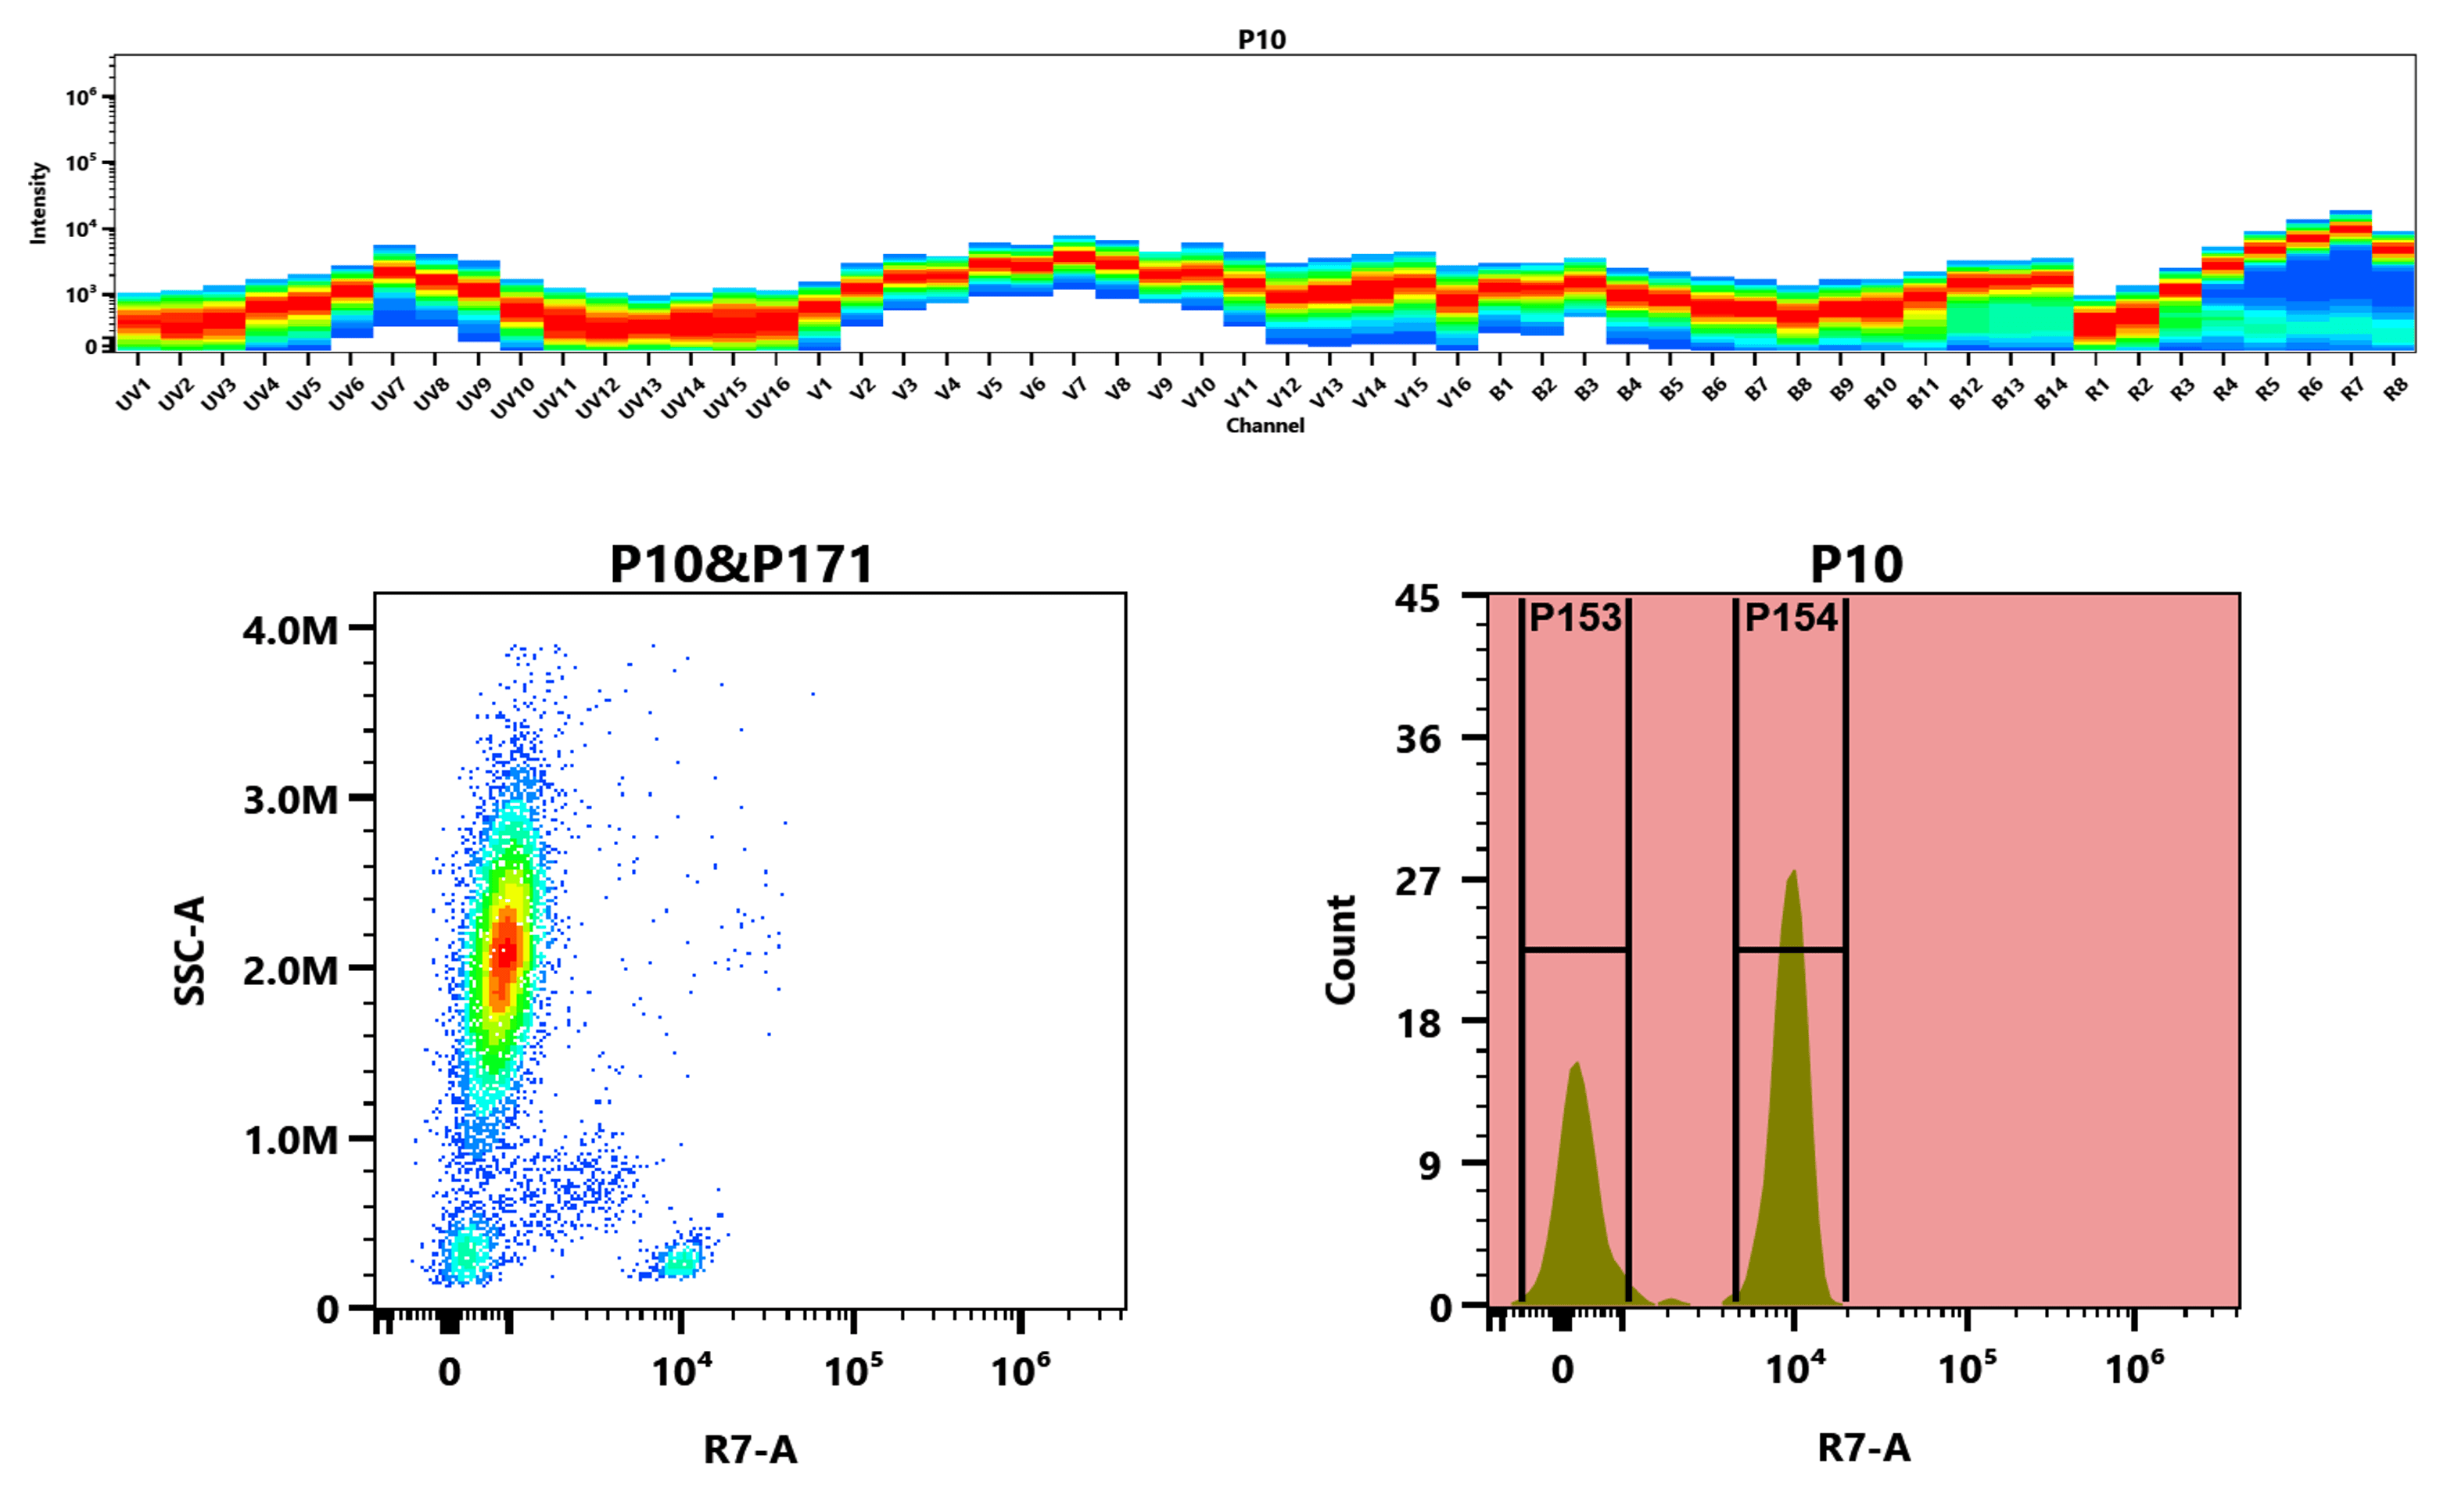 Top) The Spectral pattern was generated using a 4-laser spectral cytometer. Four spatially offset lasers (355 nm, 405 nm, 488 nm, and 640 nm) were used to create four distinct emission profiles, which, when combined, yielded the overall spectral signature. Bottom) Flow cytometry analysis of whole blood stained with mFluor™ Red 780 anti-human CD4 *SK3* conjugate. The fluorescence signal was monitored using an Aurora spectral flow cytometer in the mFluor™ Red 780 R7-A channel.